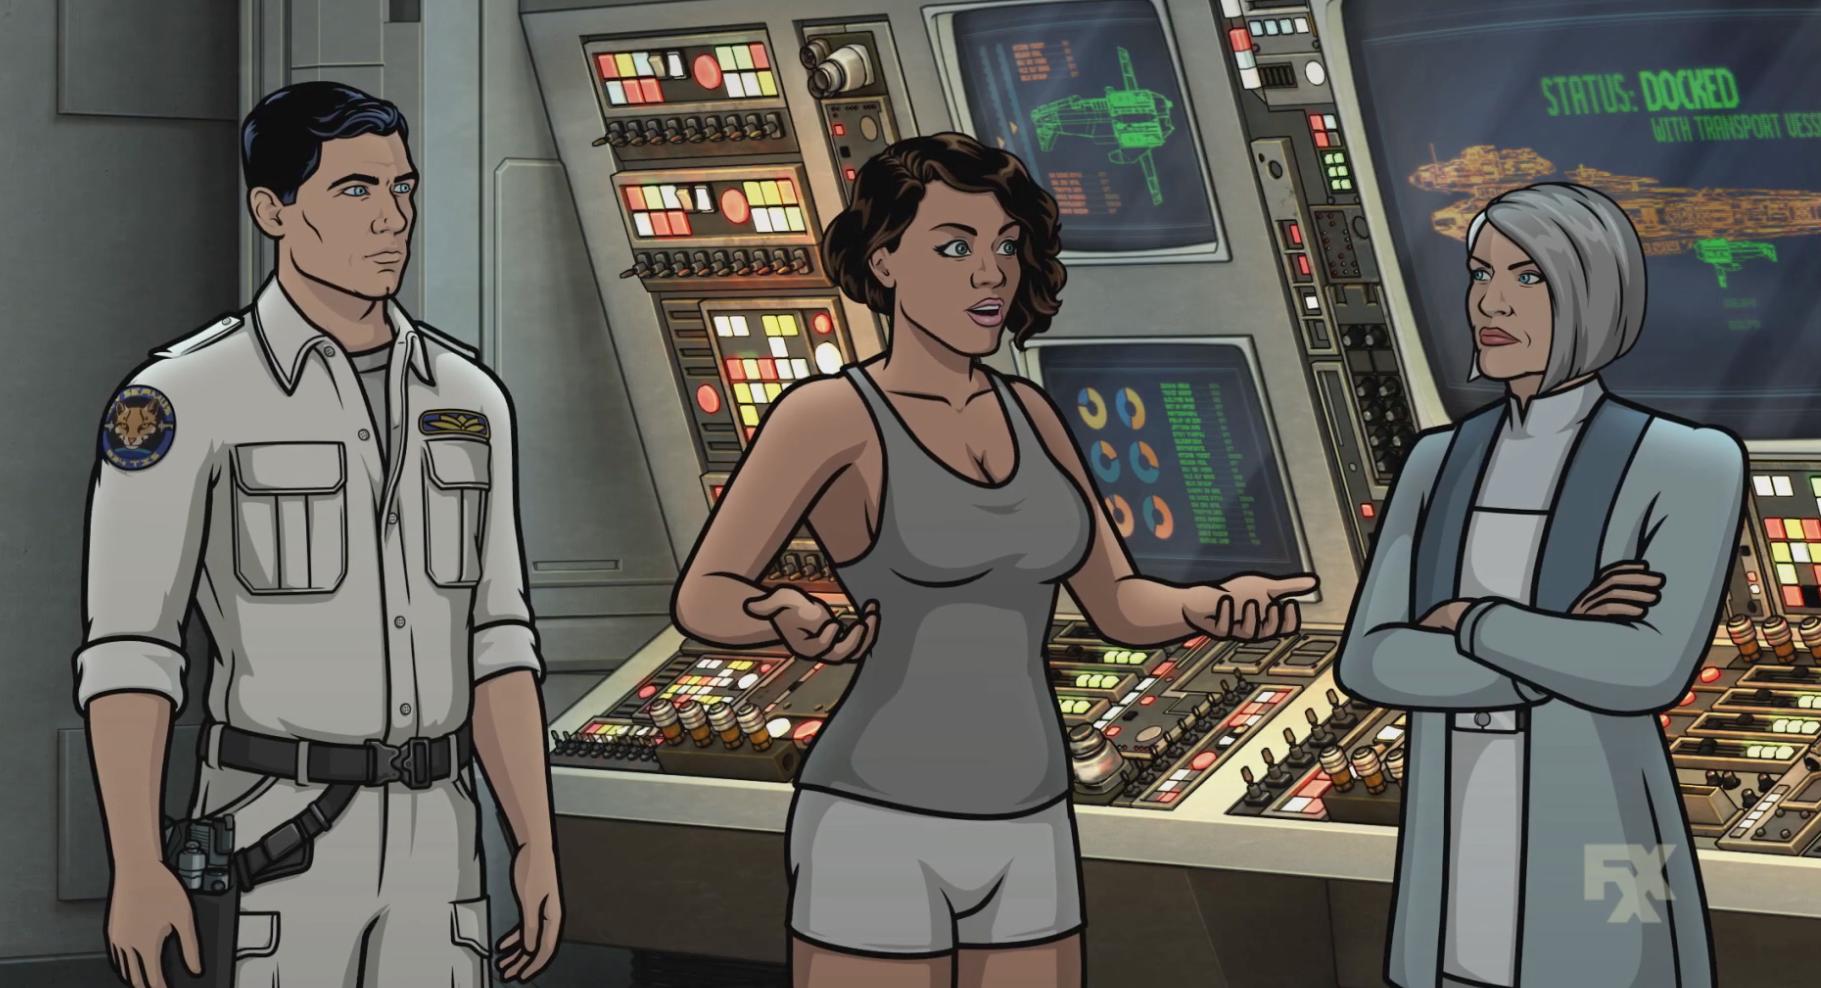 https://io9.gizmodo.com/this-behind-the-scenes-peek-at-archer-1999-confirms...